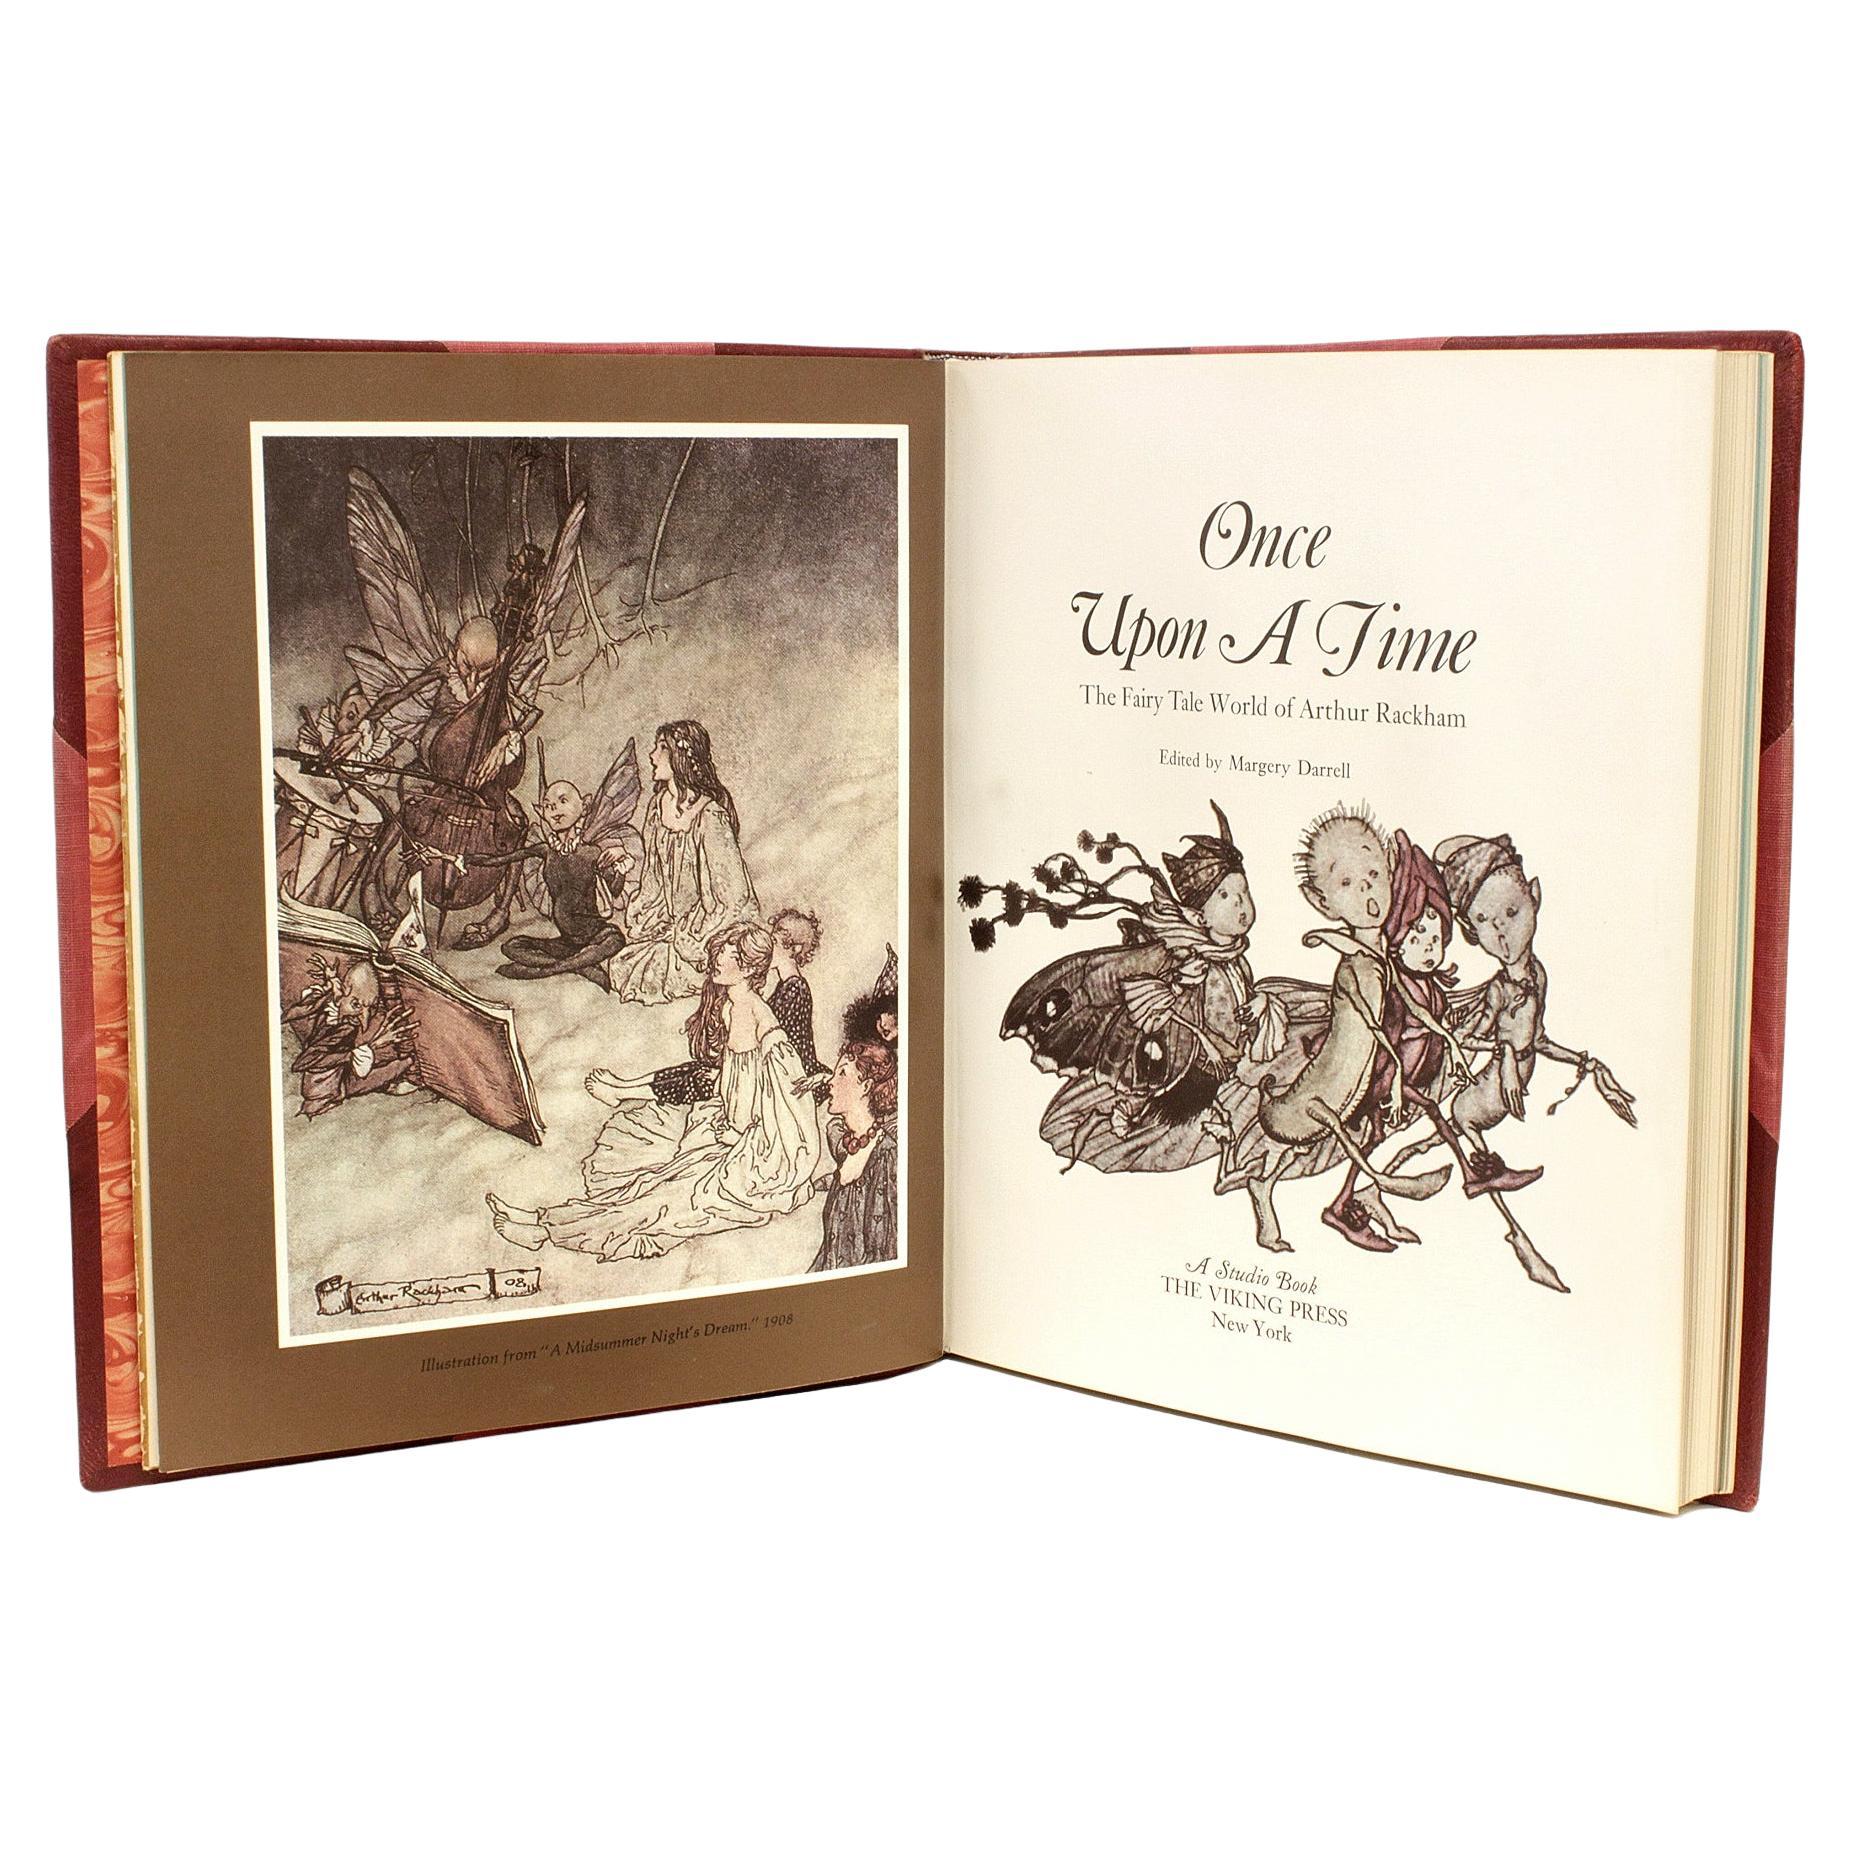 Once Upon a Time the Fair Tale World of Arthur Rackham, 1972, Leather Bound